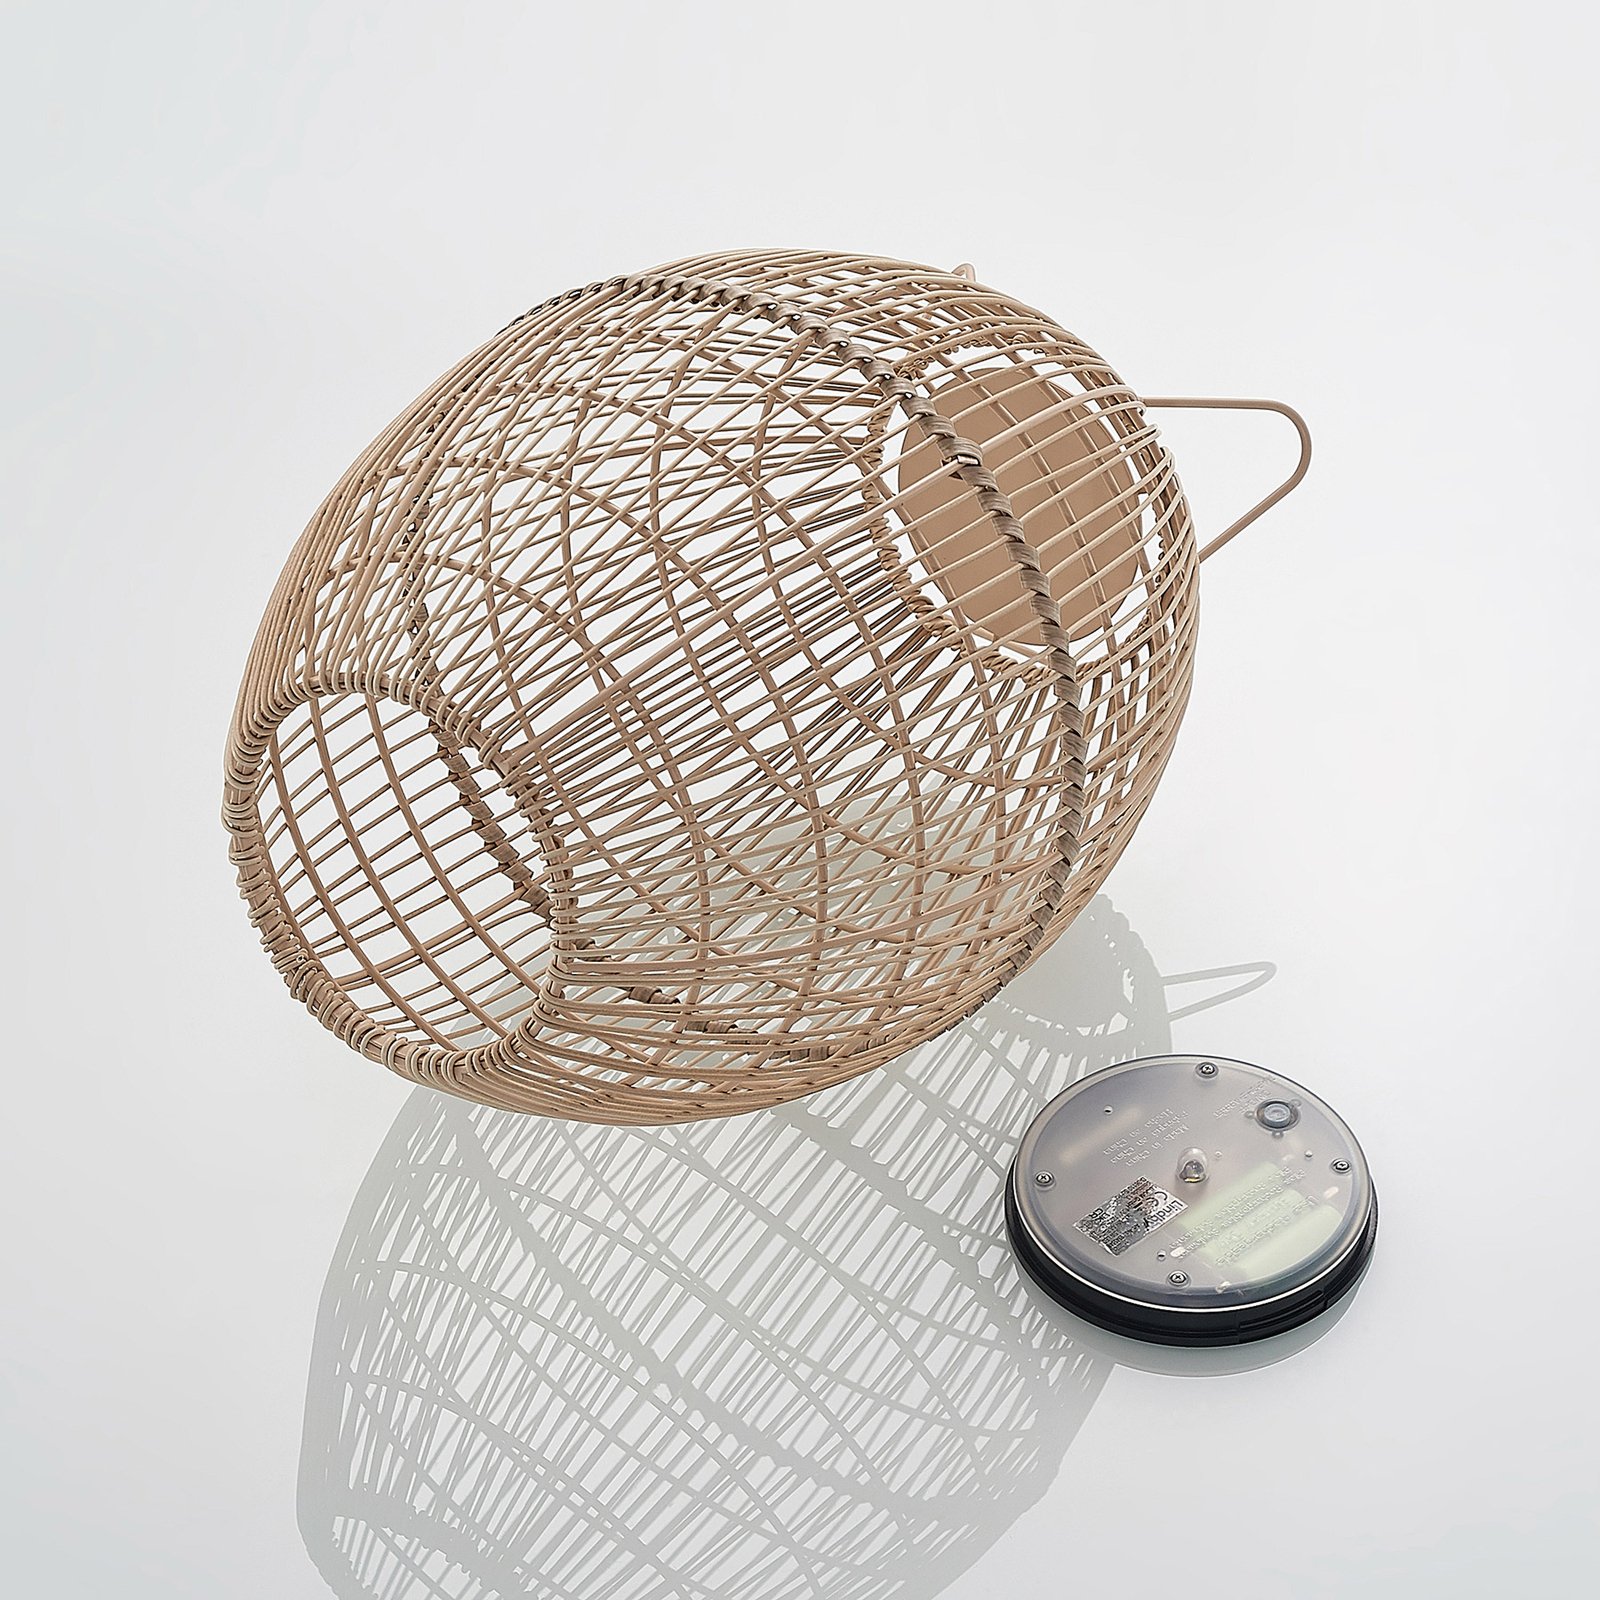 Lindby Josina LED-solcellelygte, rattan-look